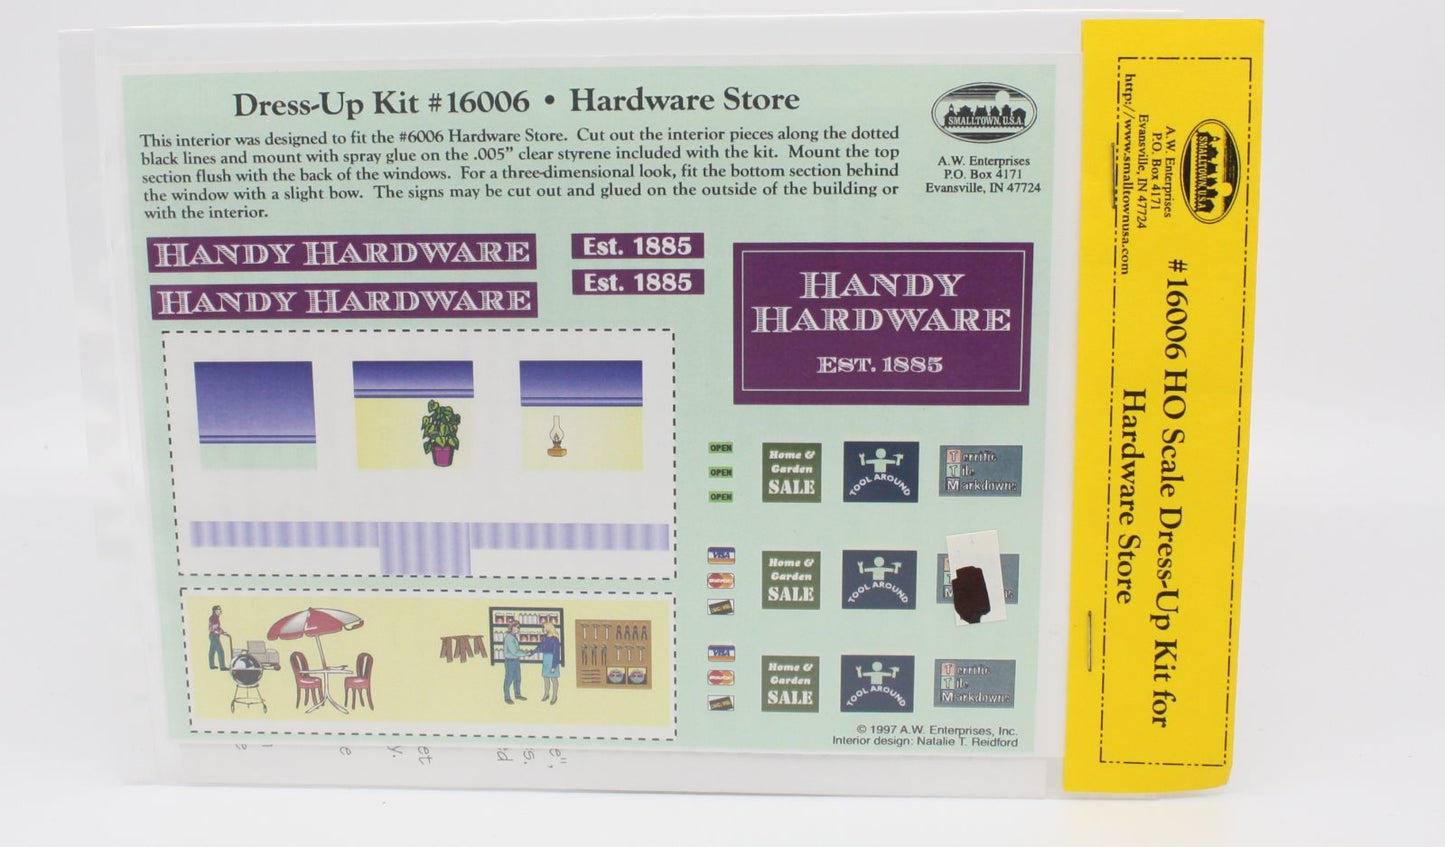 Smalltown USA 699-16006 HO Scale Dress-Up Kit for Hardware Store